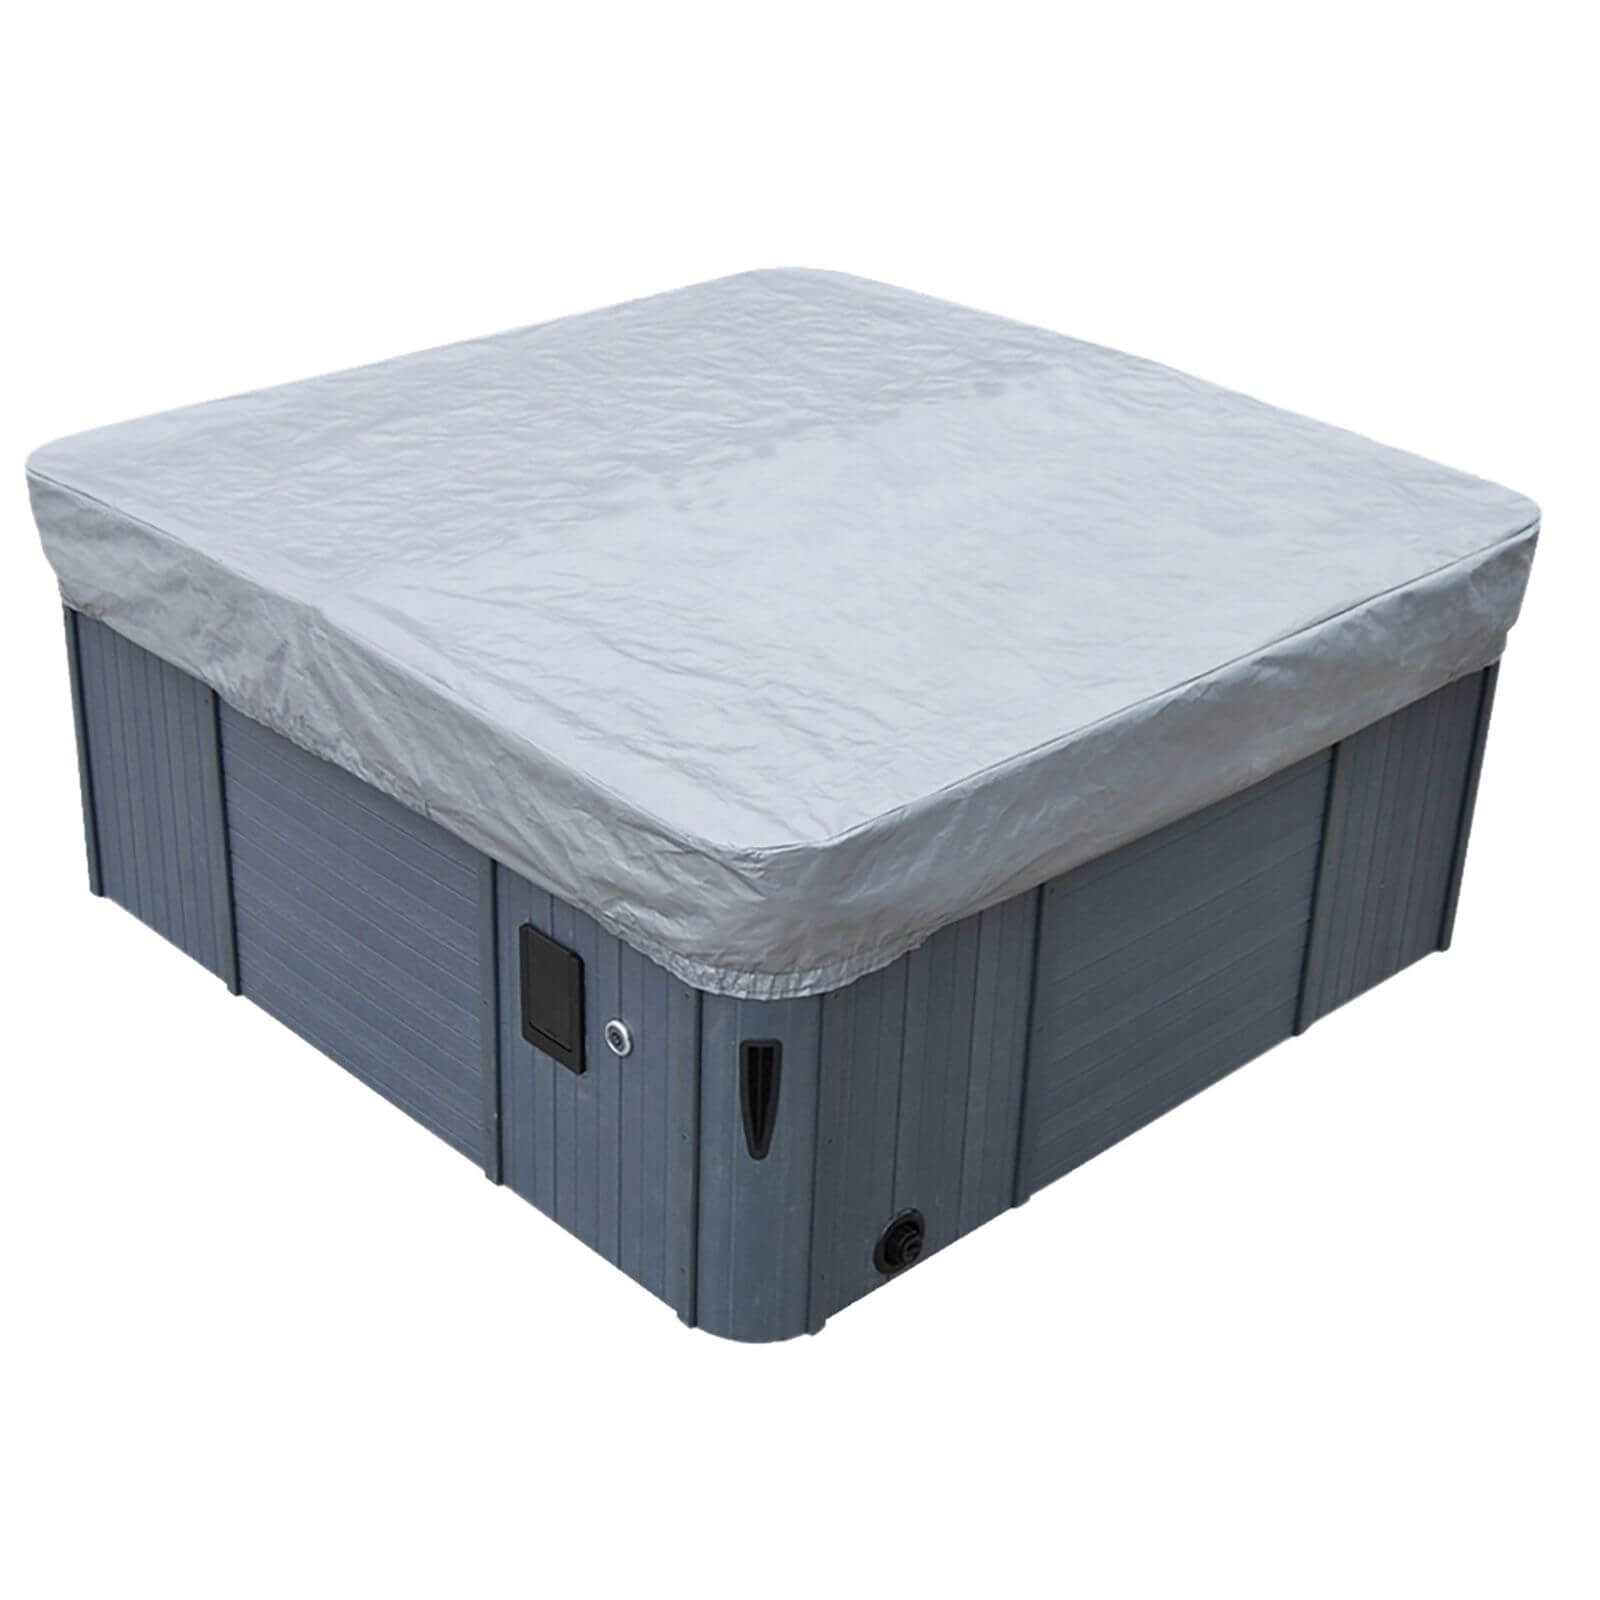 Canadian Spa Cover Guard - 84 X 84In